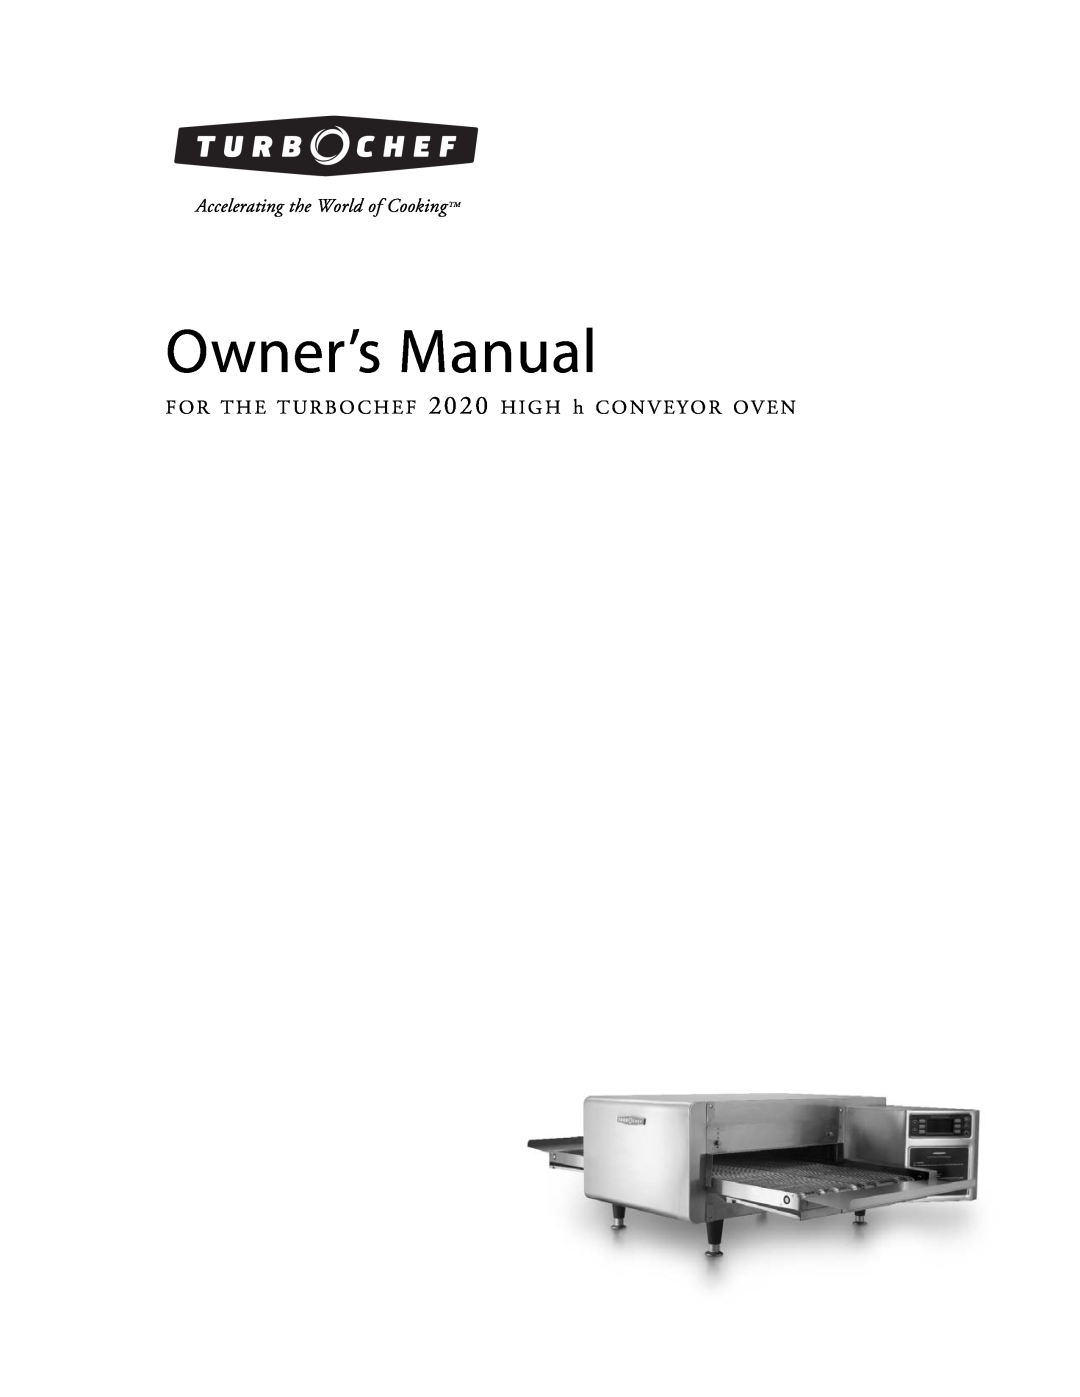 Turbo Chef Technologies 2020 HIGH h manual Owner’s Manual, Accelerating the World of Cooking TM 